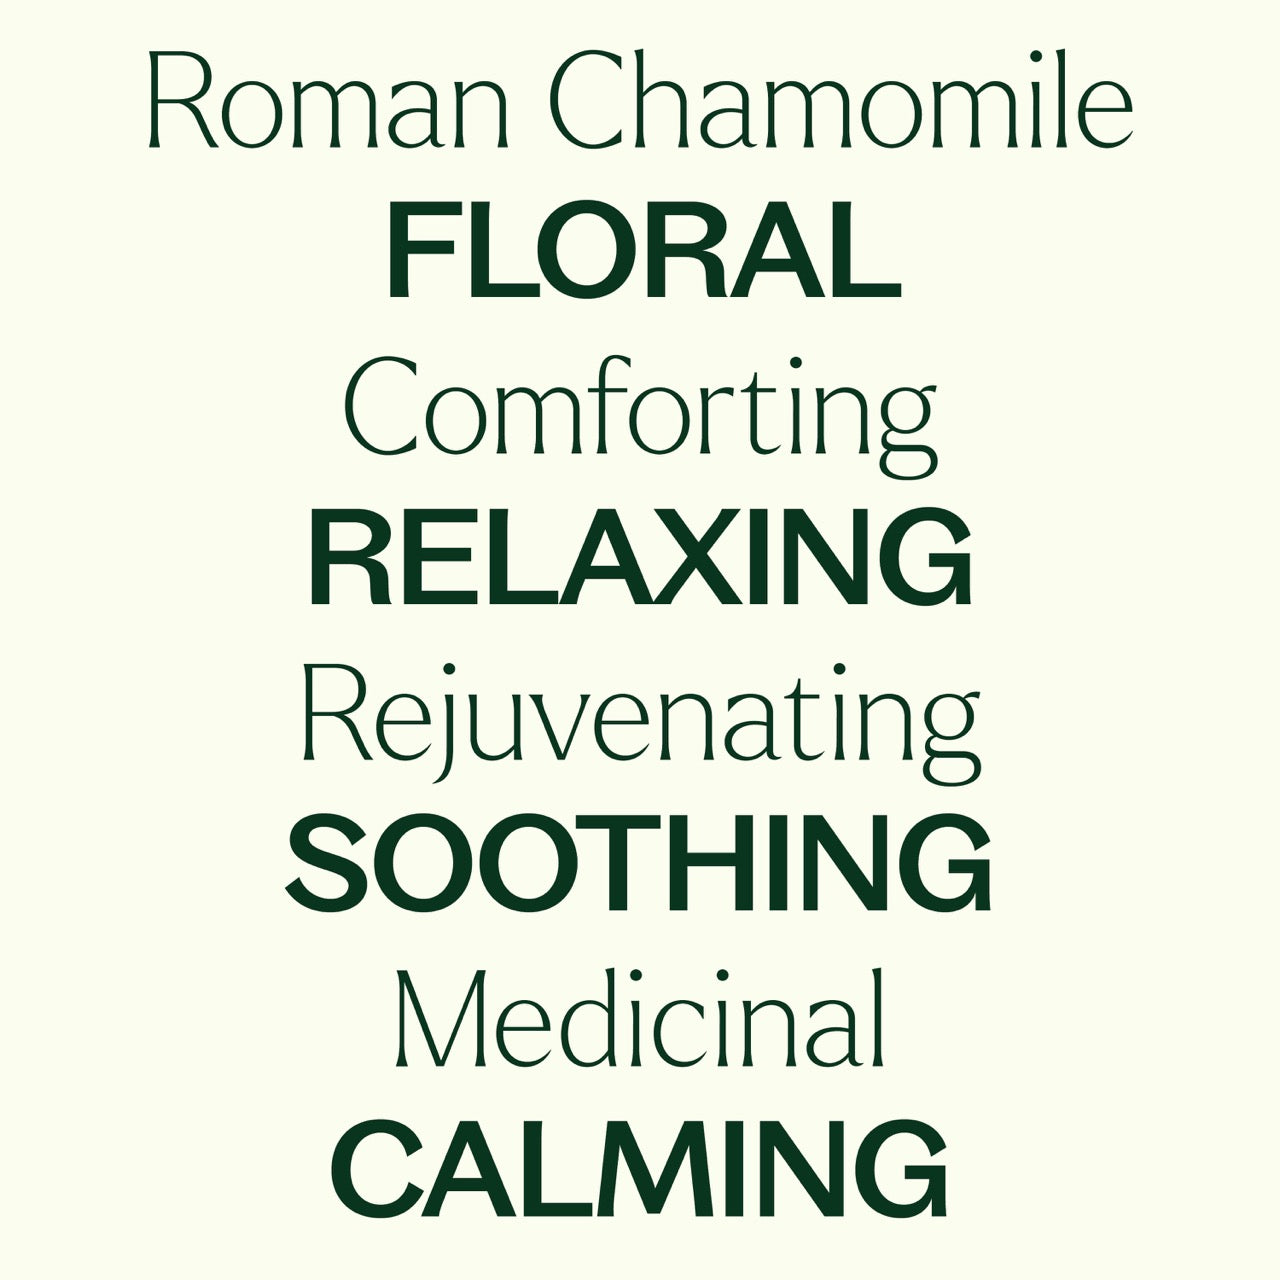 Roman Chamomile Essential Oil key features: floral, comforting, relaxing, rejuvenating, soothing, medicinal, calming